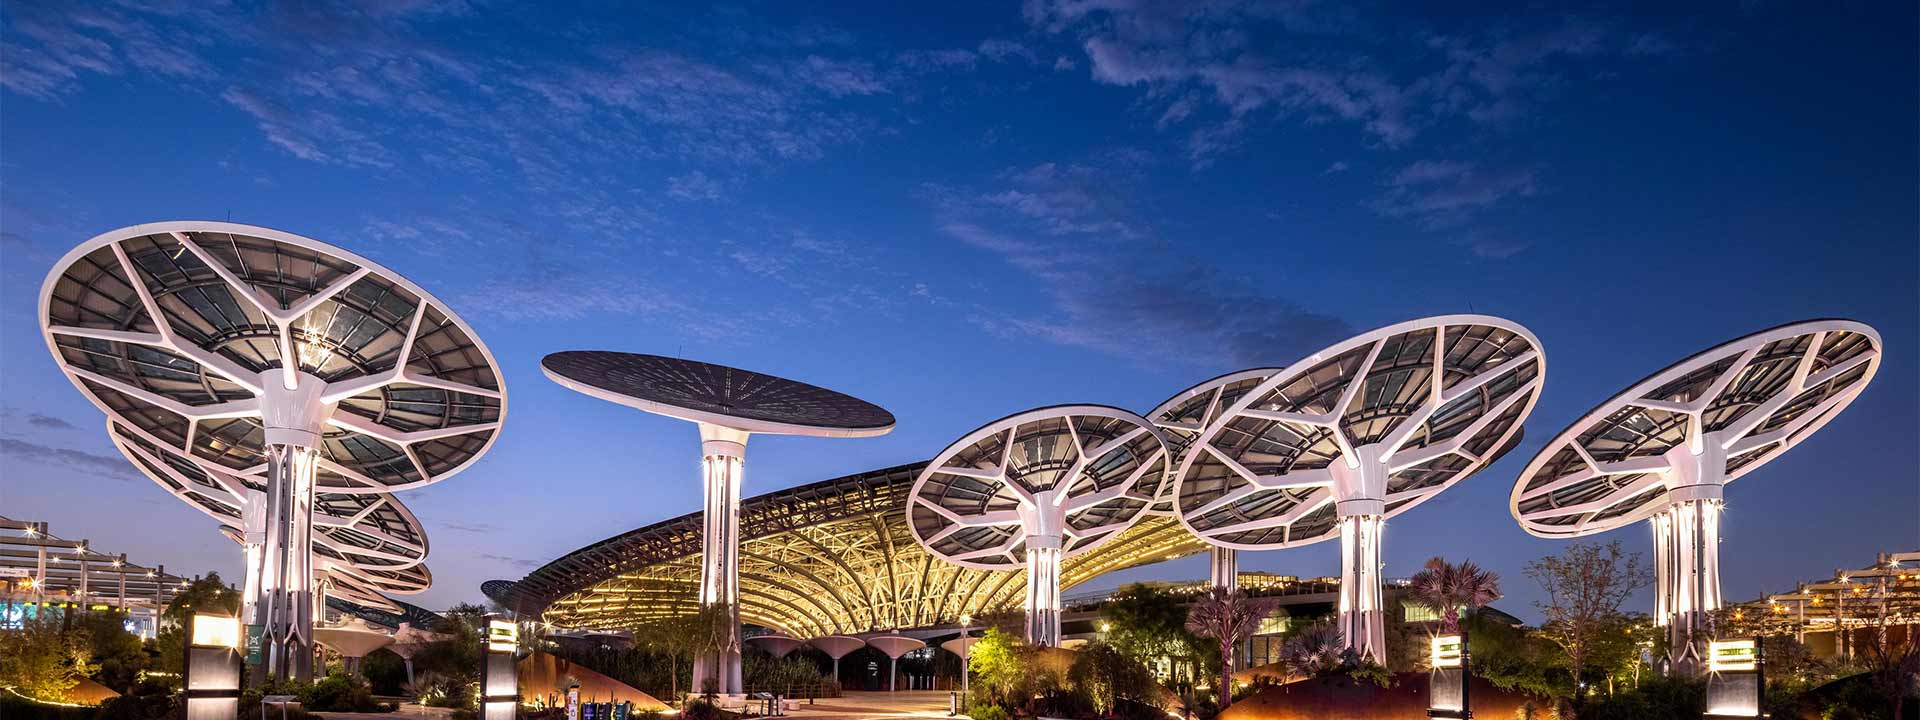 The World’s Fair In Dubai: Connecting Minds And Creating The Future Through Sustainability, Mobility, And Opportunity